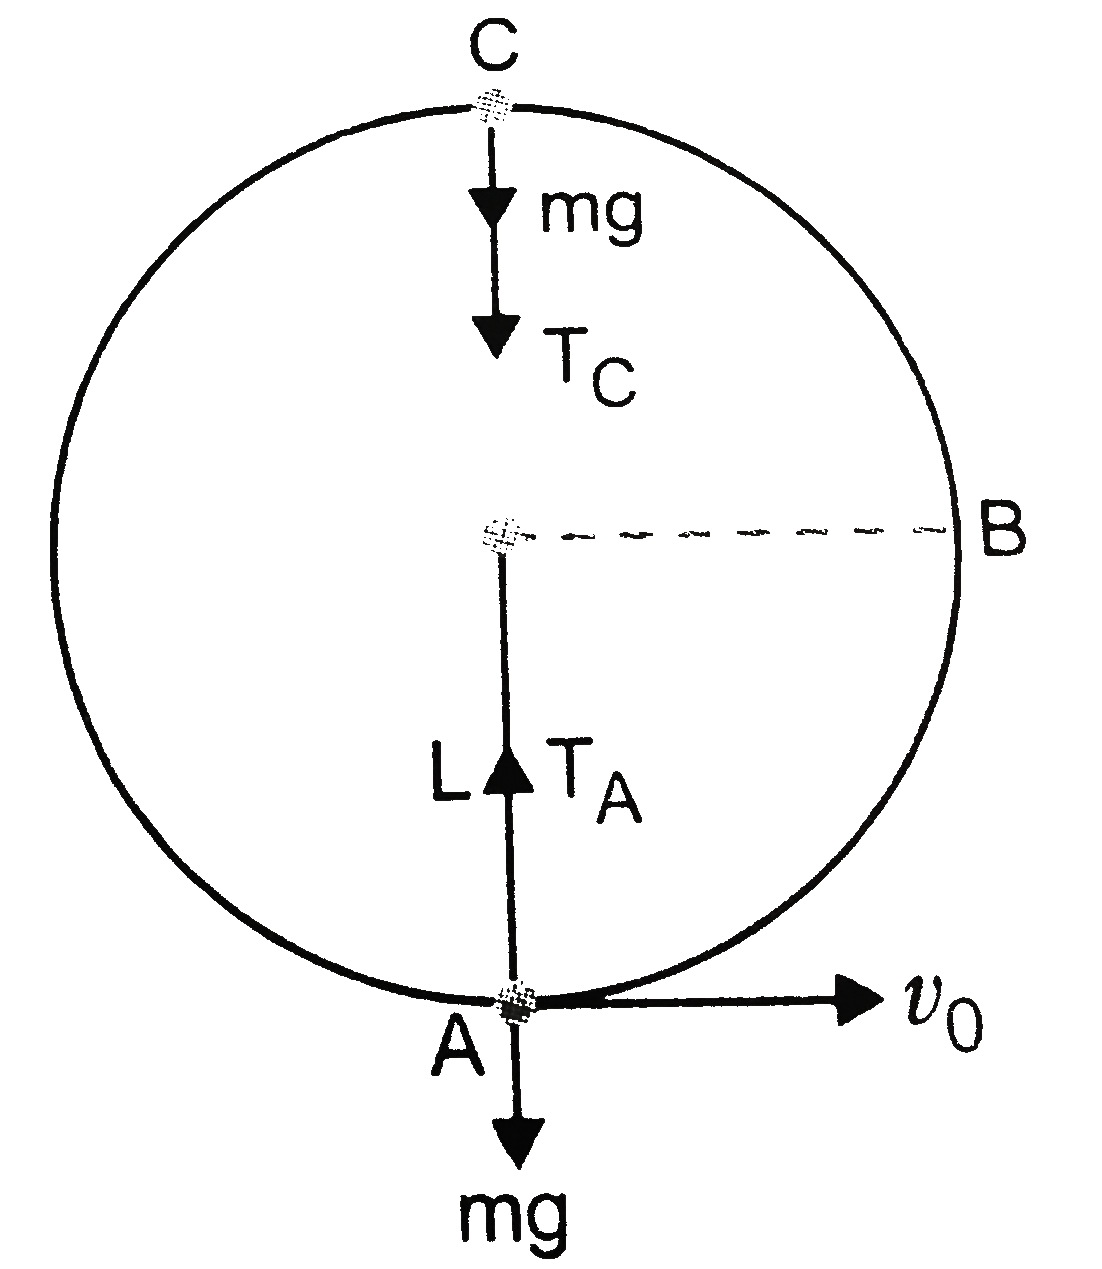 A bob of mass m is suspended by a light string of length L. It is imparted a horizontal velocity v(0) at the lowest point A such that it completes a semi-circular trajectory in the vertical plane with the string becoming slack on reaching the topmost point C, figure, Obtain an expression for (i) v(0) (ii) the speeds at points B and C, (ii) the ration of kinetic energies (K(B)//K(C)) at B and C.   Comment on the nature of the trajectory of the bob after it reahes the poing C.